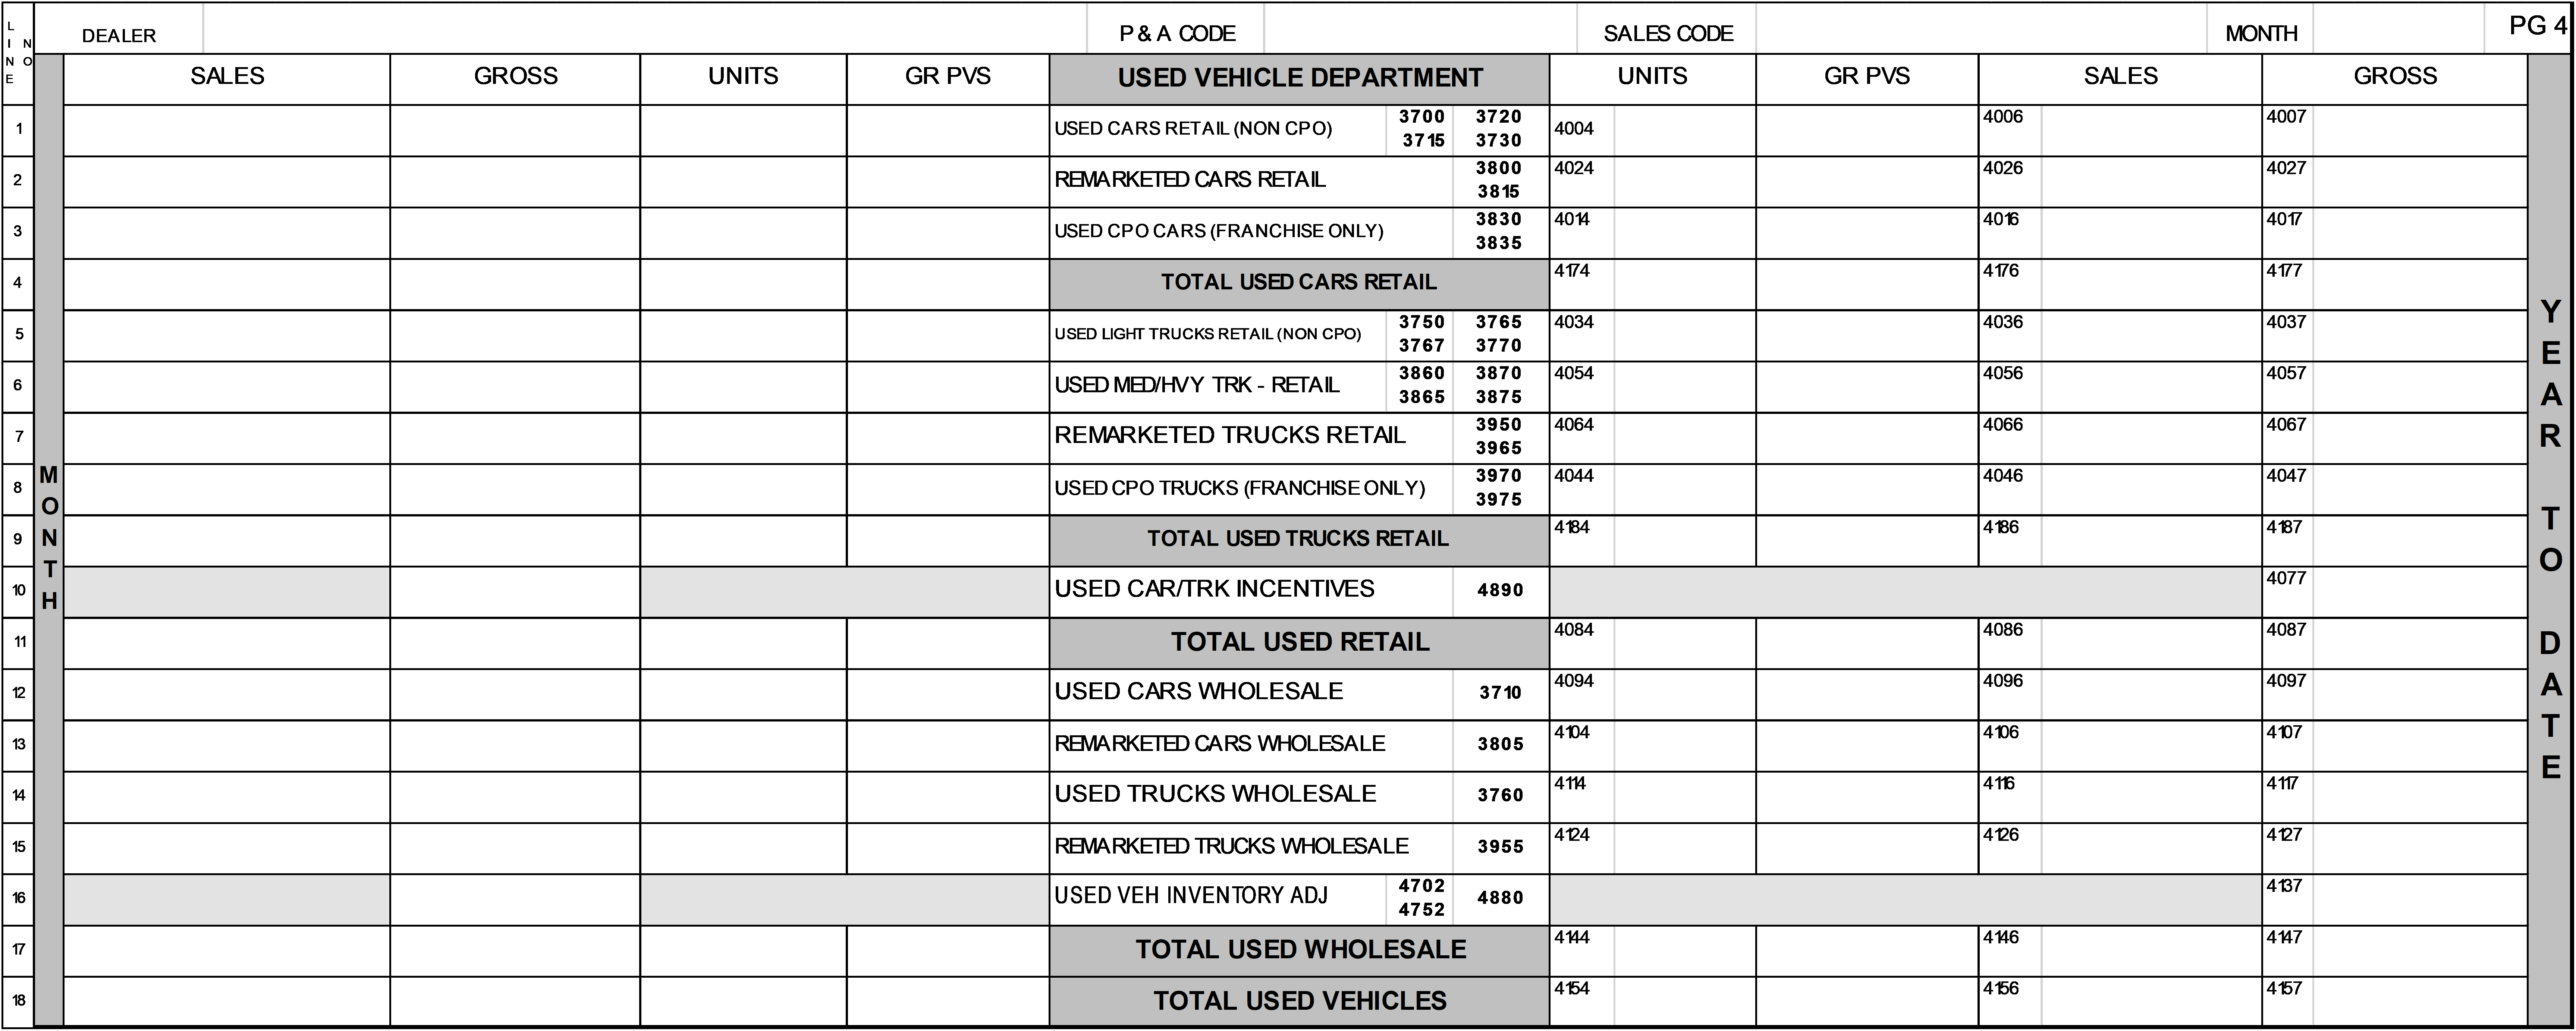 2021 2020 – Page 4 – Used Vehicle Sales and Gross Profit